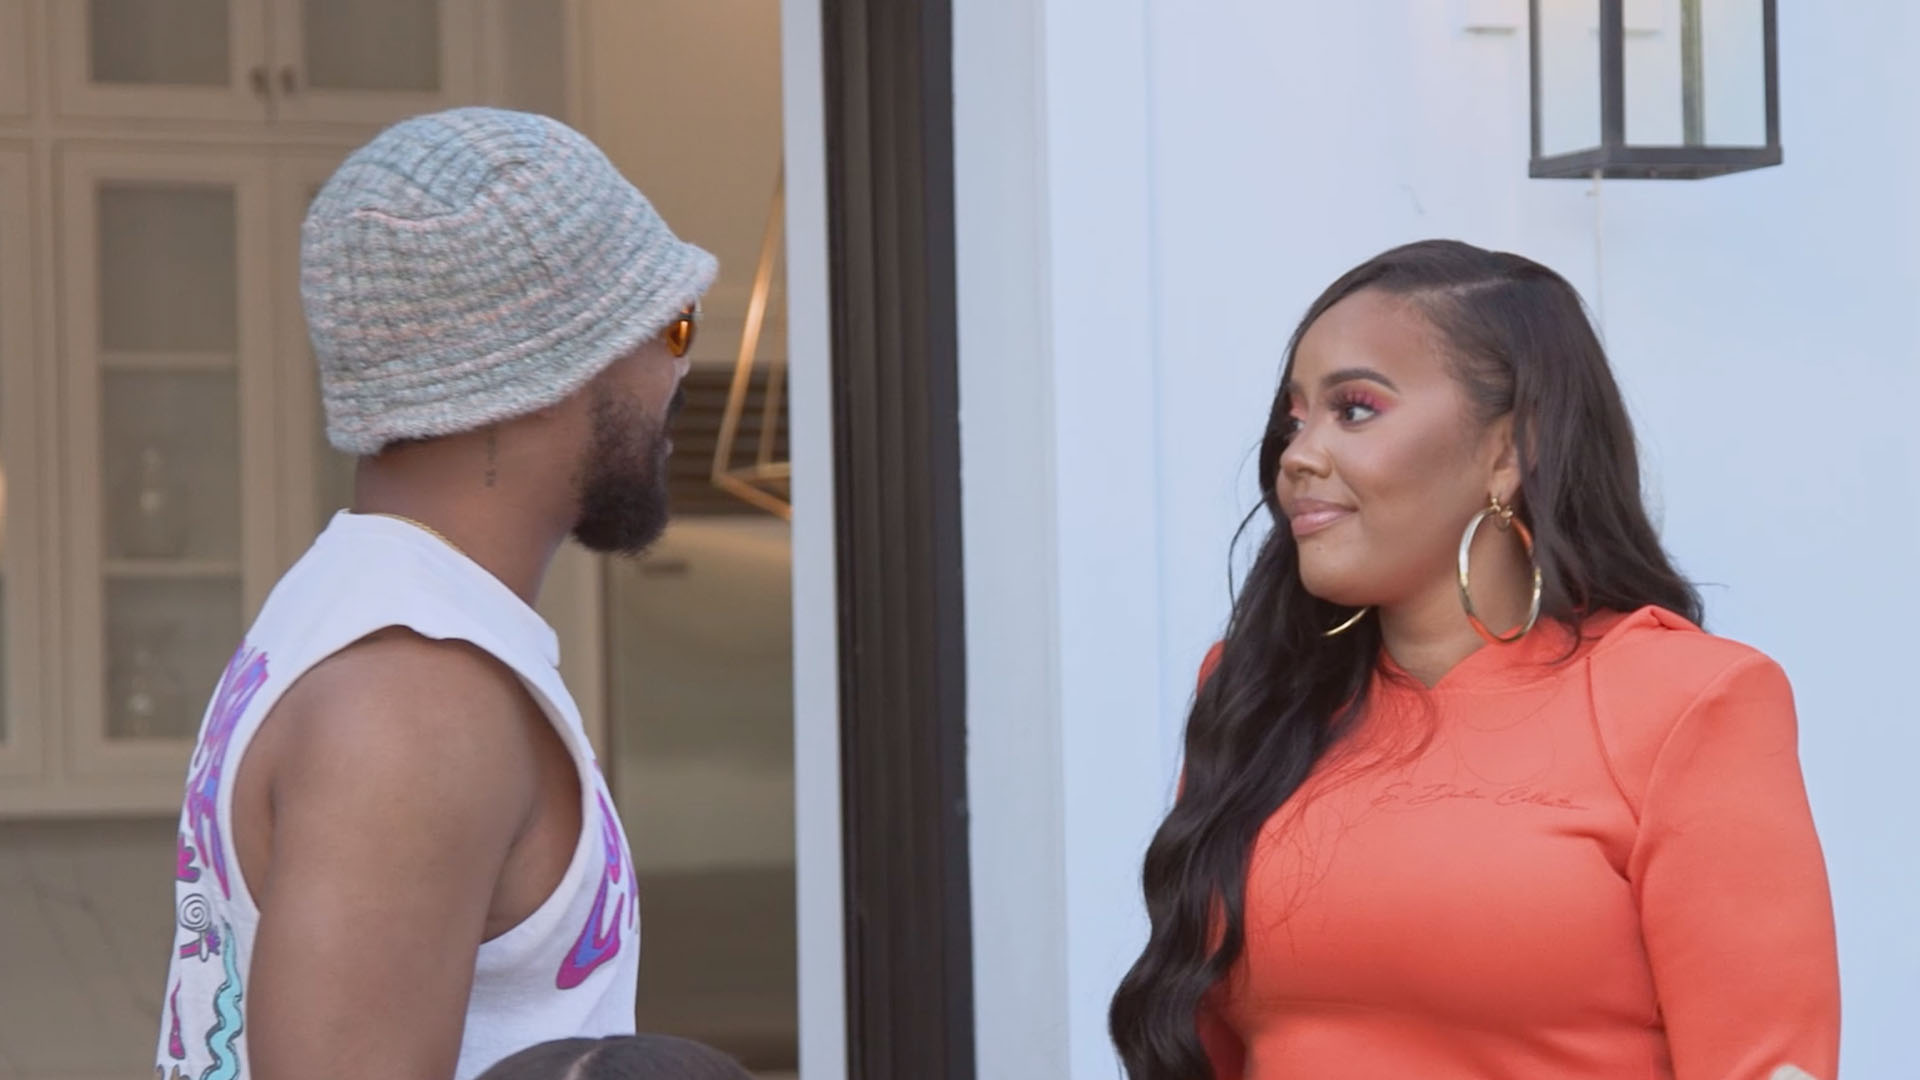 Watch Sneak Peek: Romeo Comes Face-to-Face with Angela! | Growing Up Hip Hop Video Extras